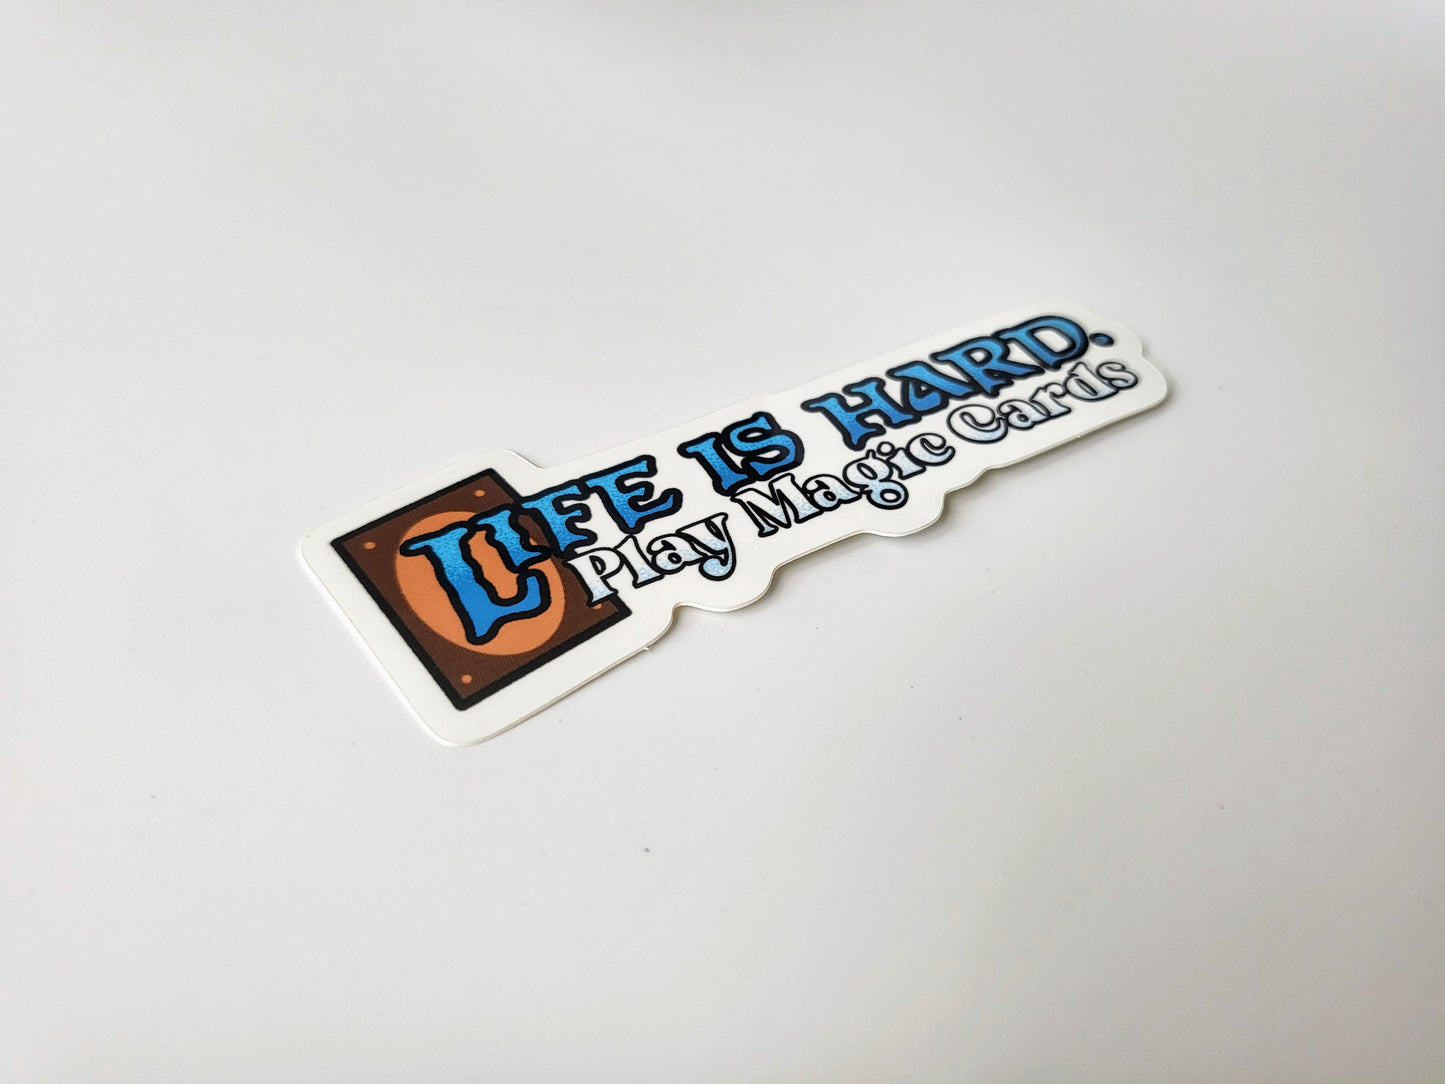 Life is hard. Play Magic cards. - Funny Sticker for Magic the Gathering Fans